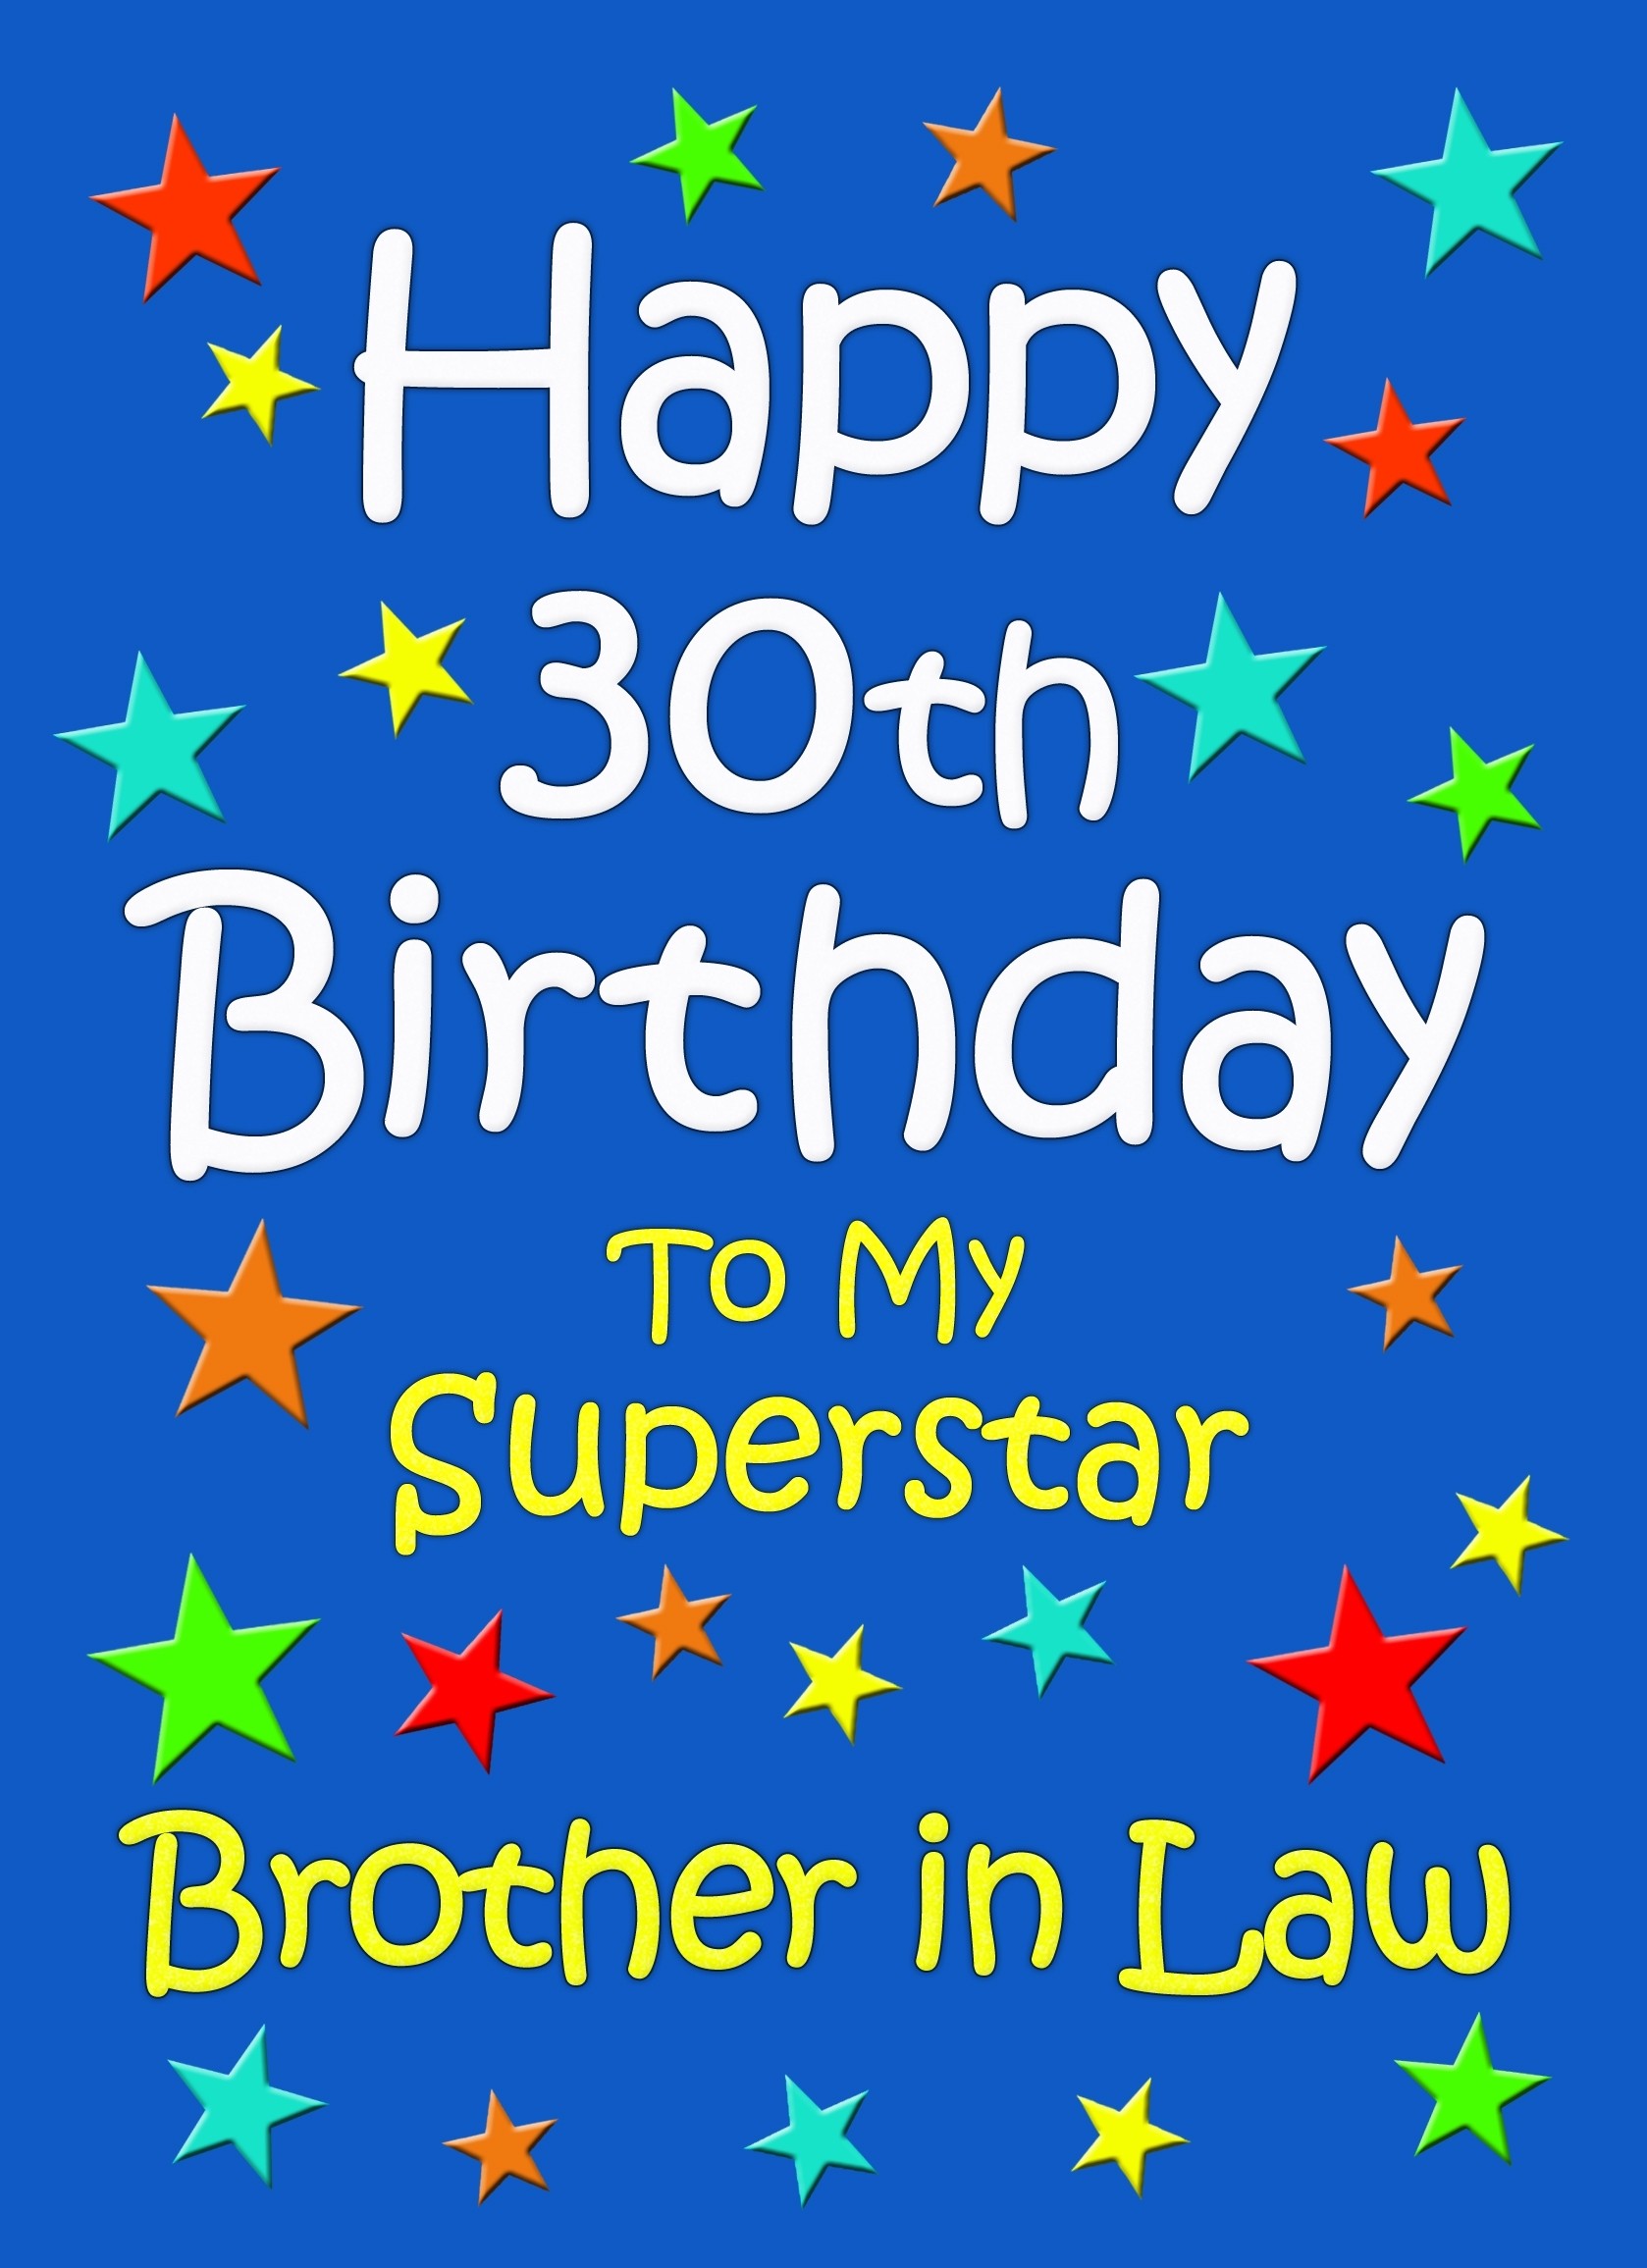 Brother in Law 30th Birthday Card (Blue)